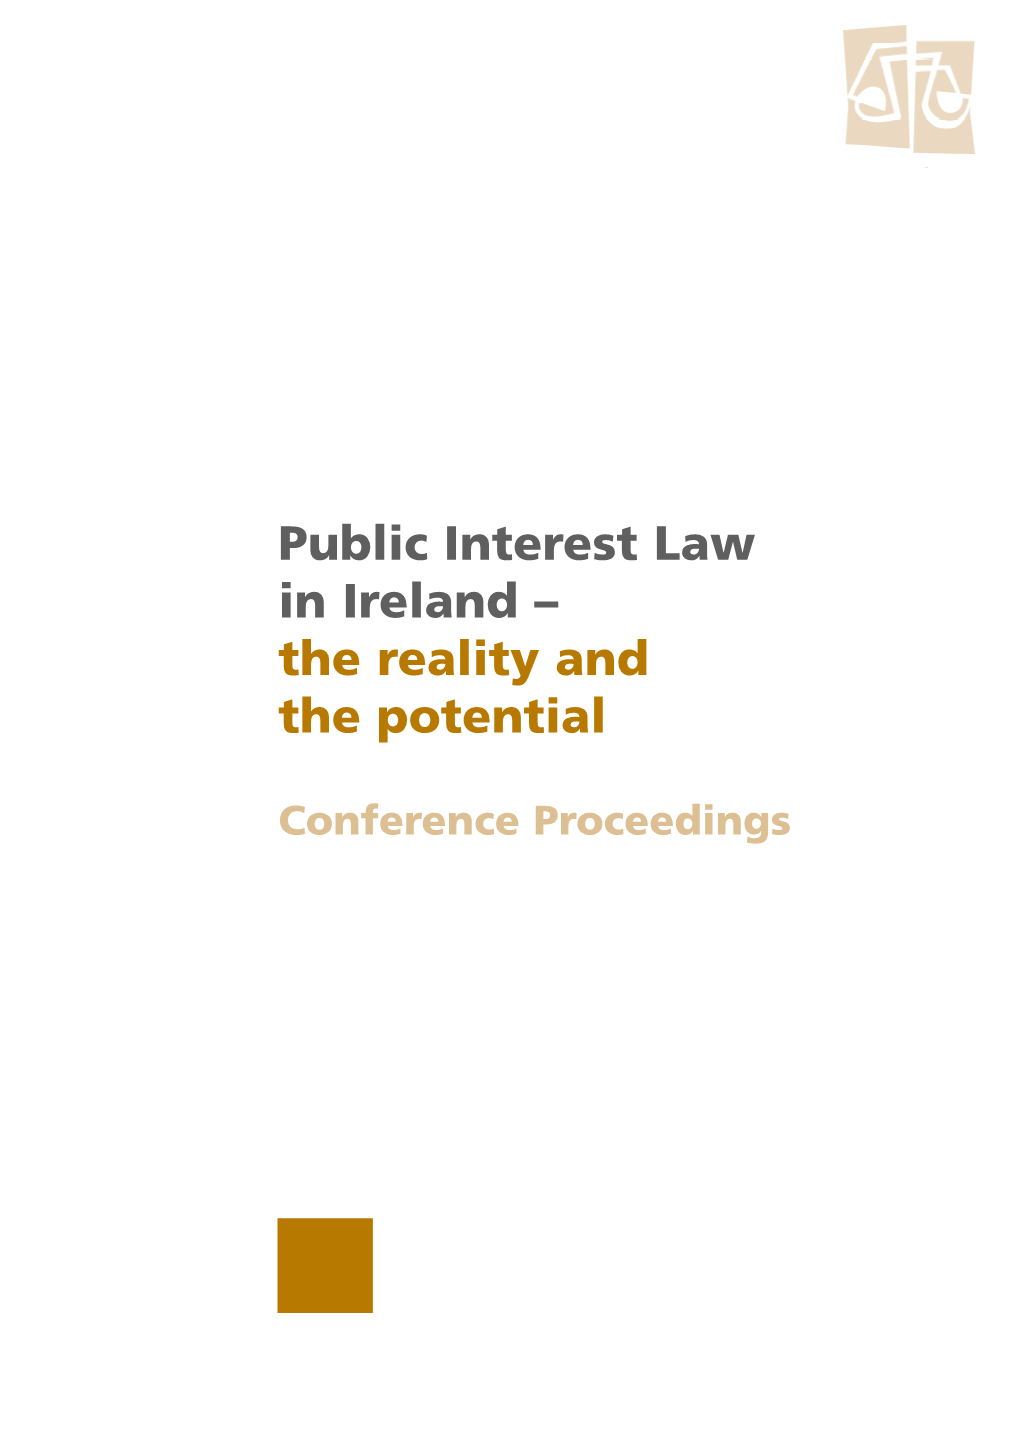 Public Interest Law in Ireland – the Reality and the Potential